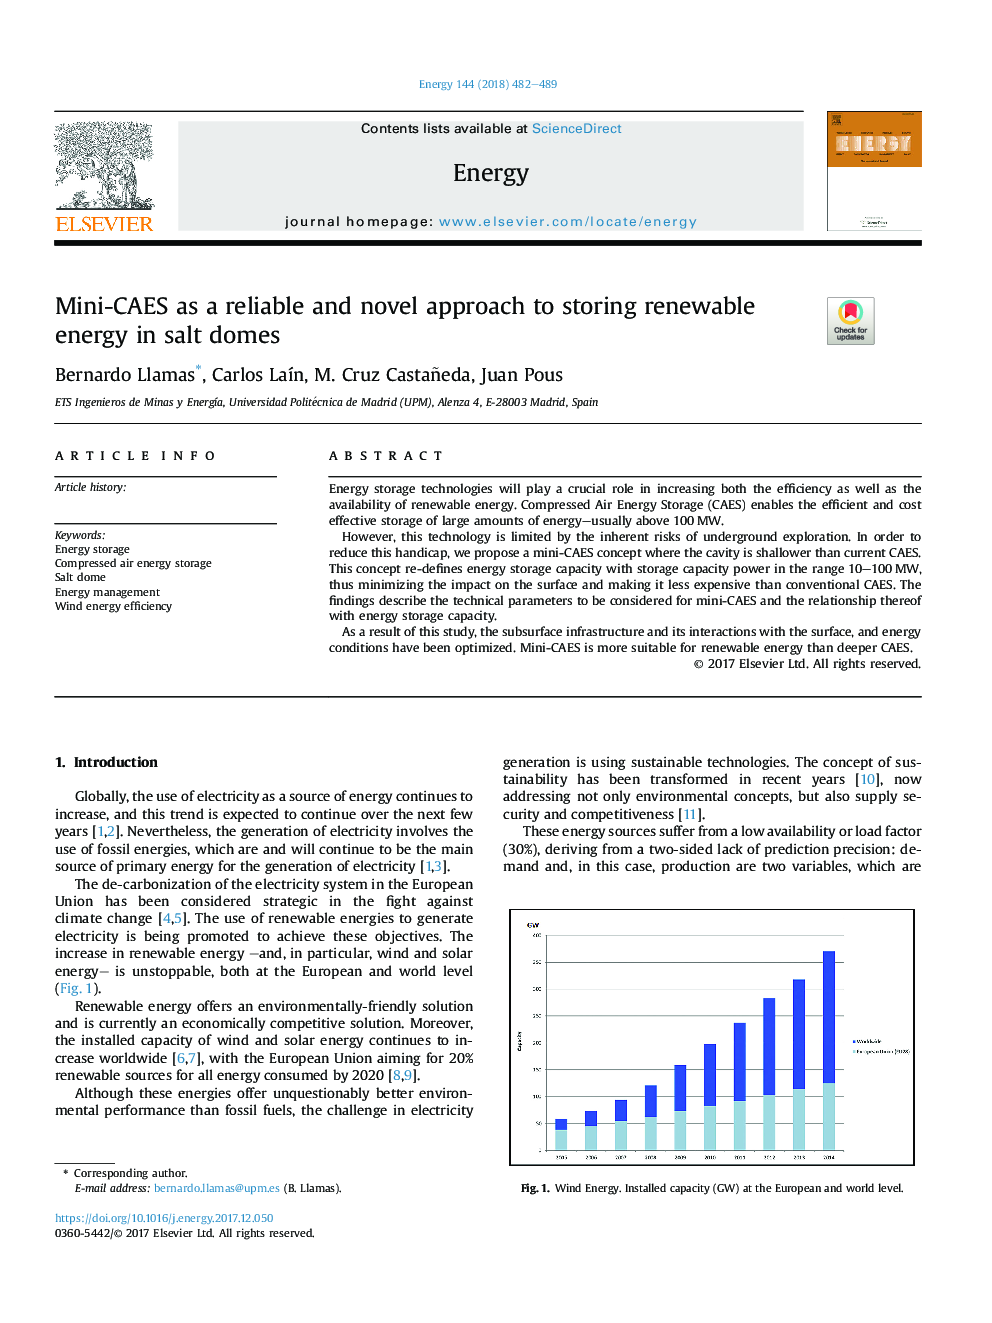 Mini-CAES as a reliable and novel approach to storing renewable energy in salt domes